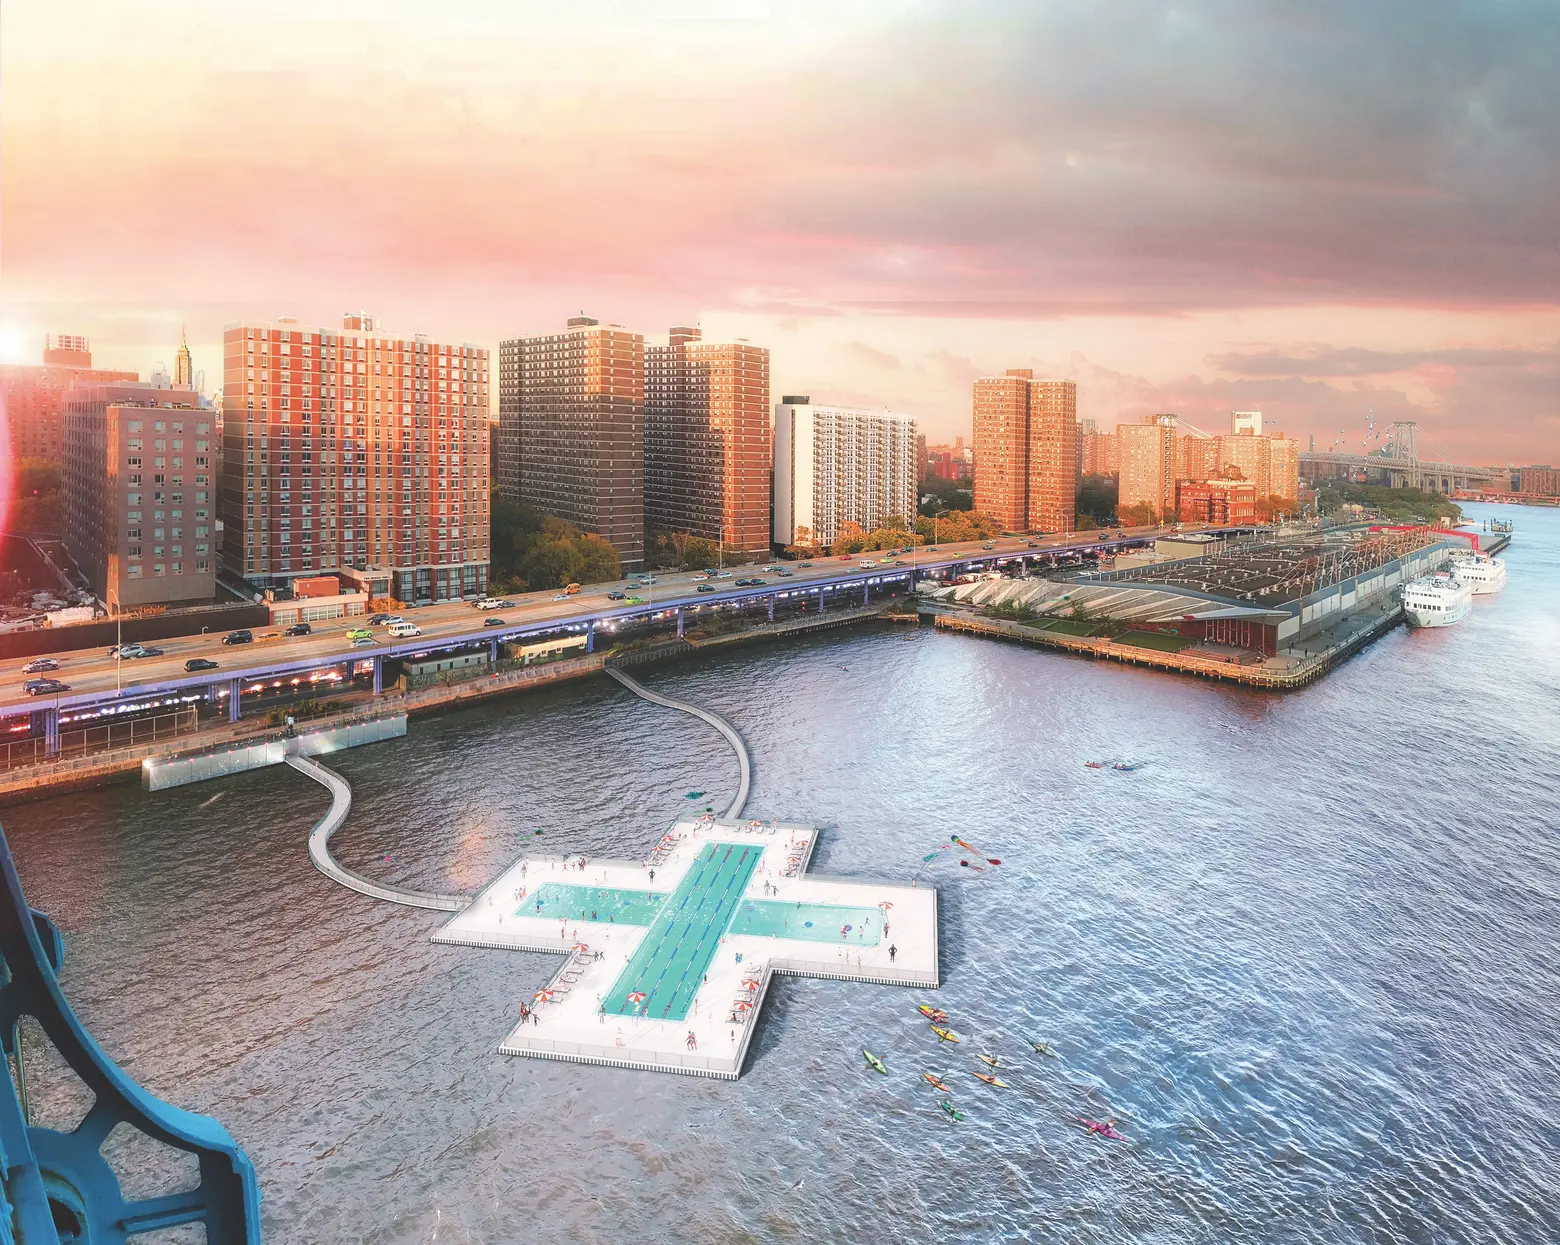 A self-filtering floating pool is officially coming to the East River